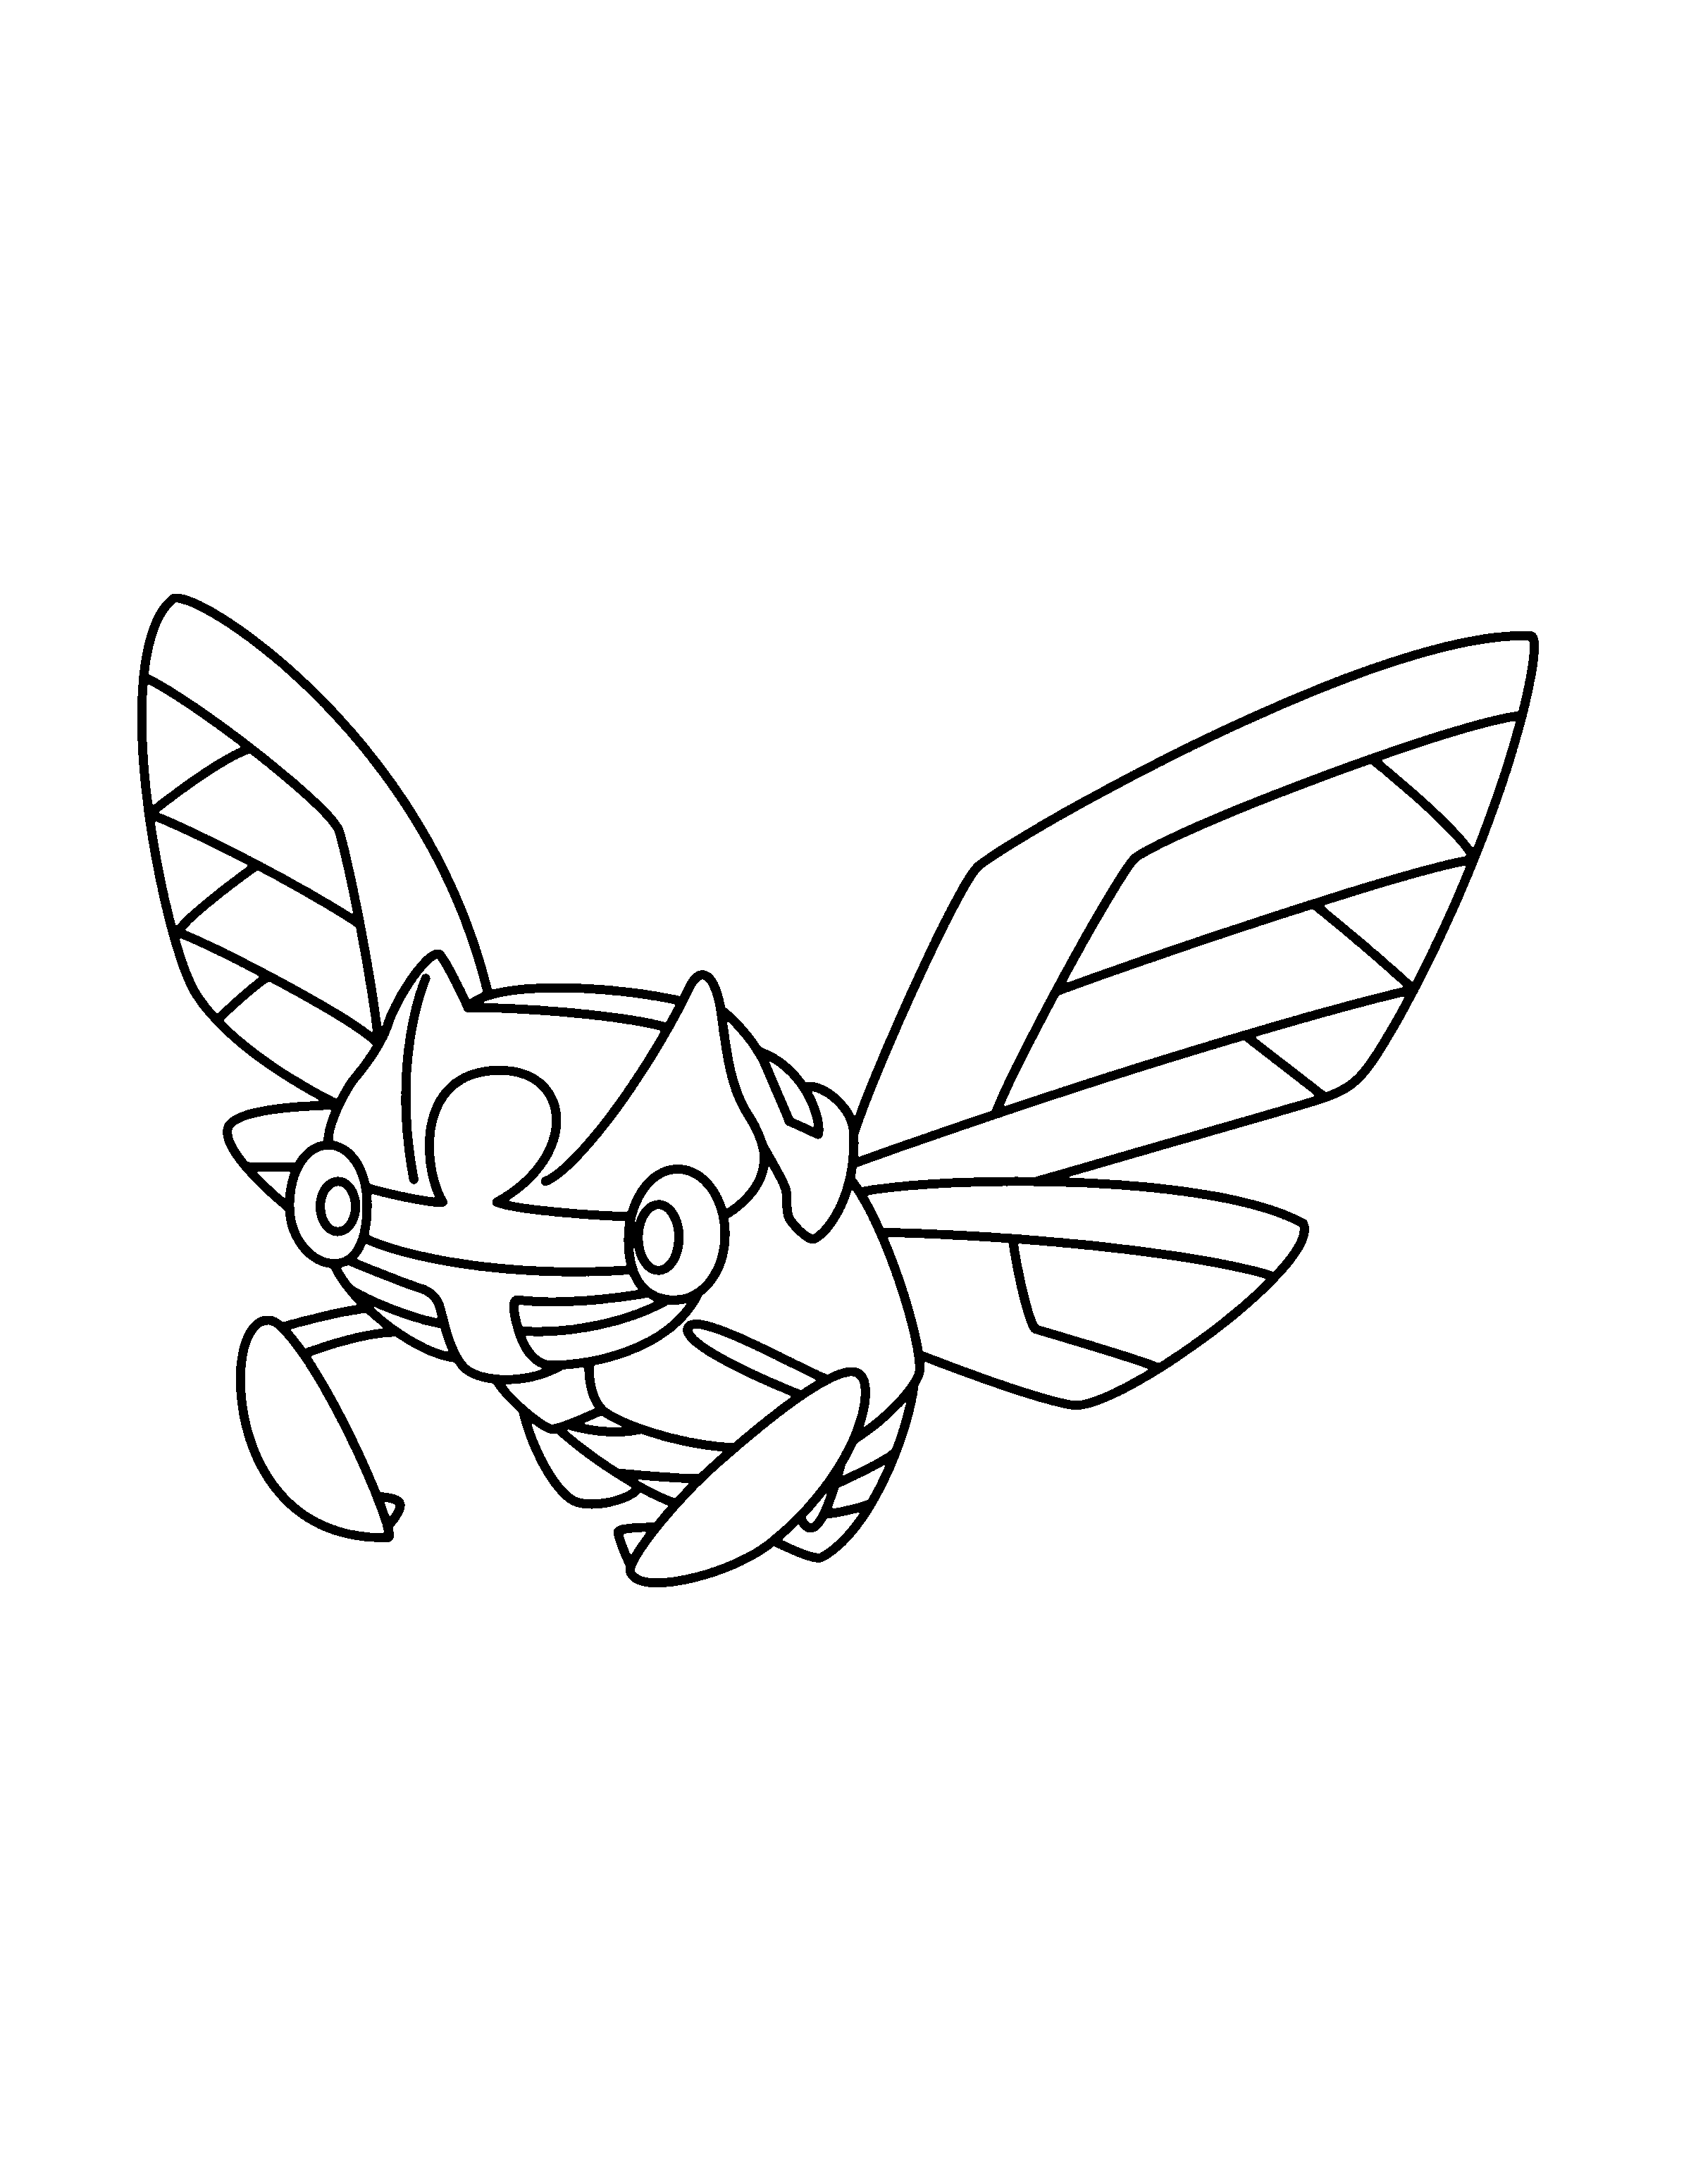 animated-coloring-pages-pokemon-image-0921